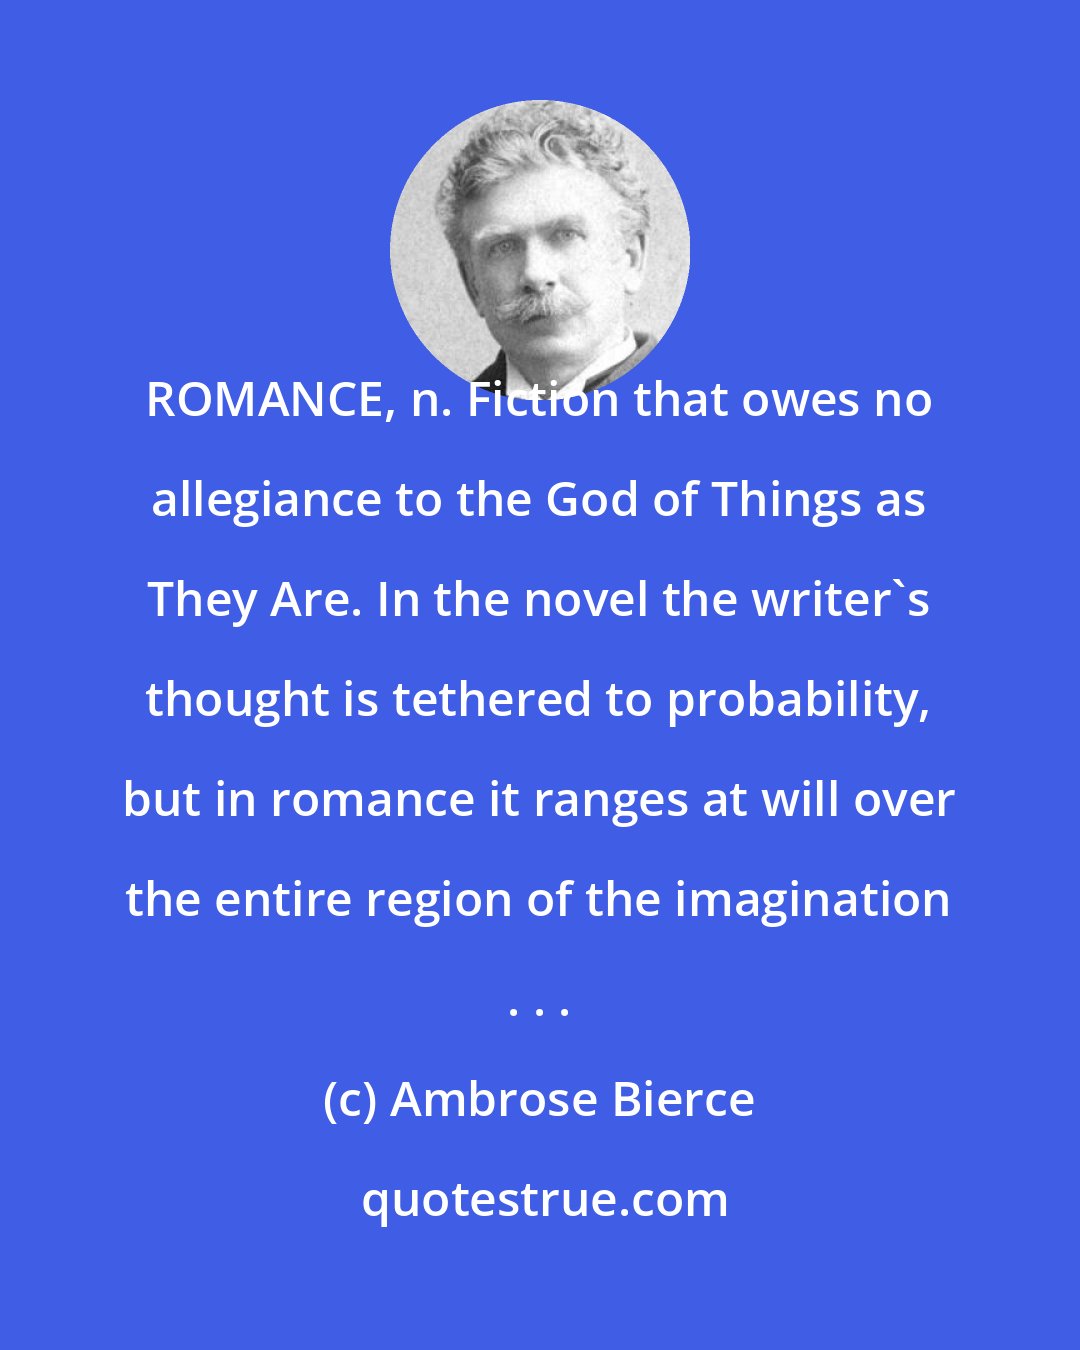 Ambrose Bierce: ROMANCE, n. Fiction that owes no allegiance to the God of Things as They Are. In the novel the writer's thought is tethered to probability, but in romance it ranges at will over the entire region of the imagination . . .